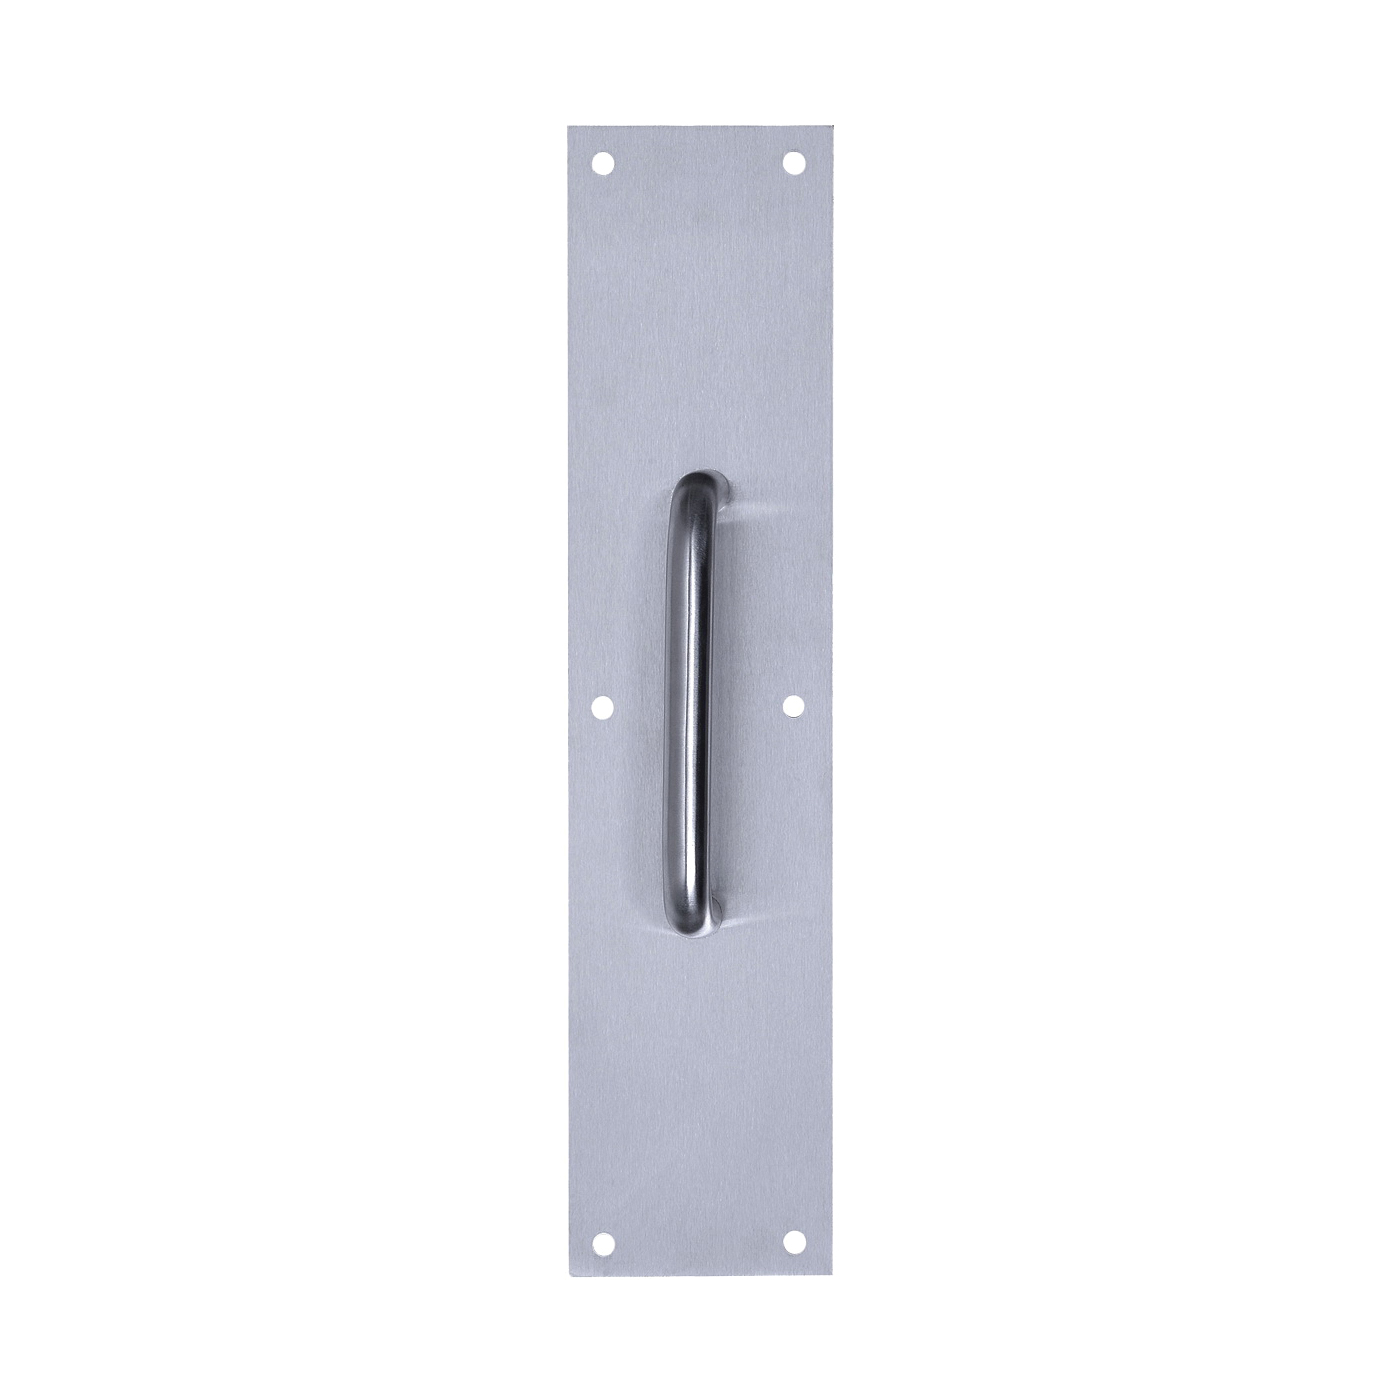 DT100067 Door Pull Plate, 3-1/2 in W, Stainless Steel, Satin